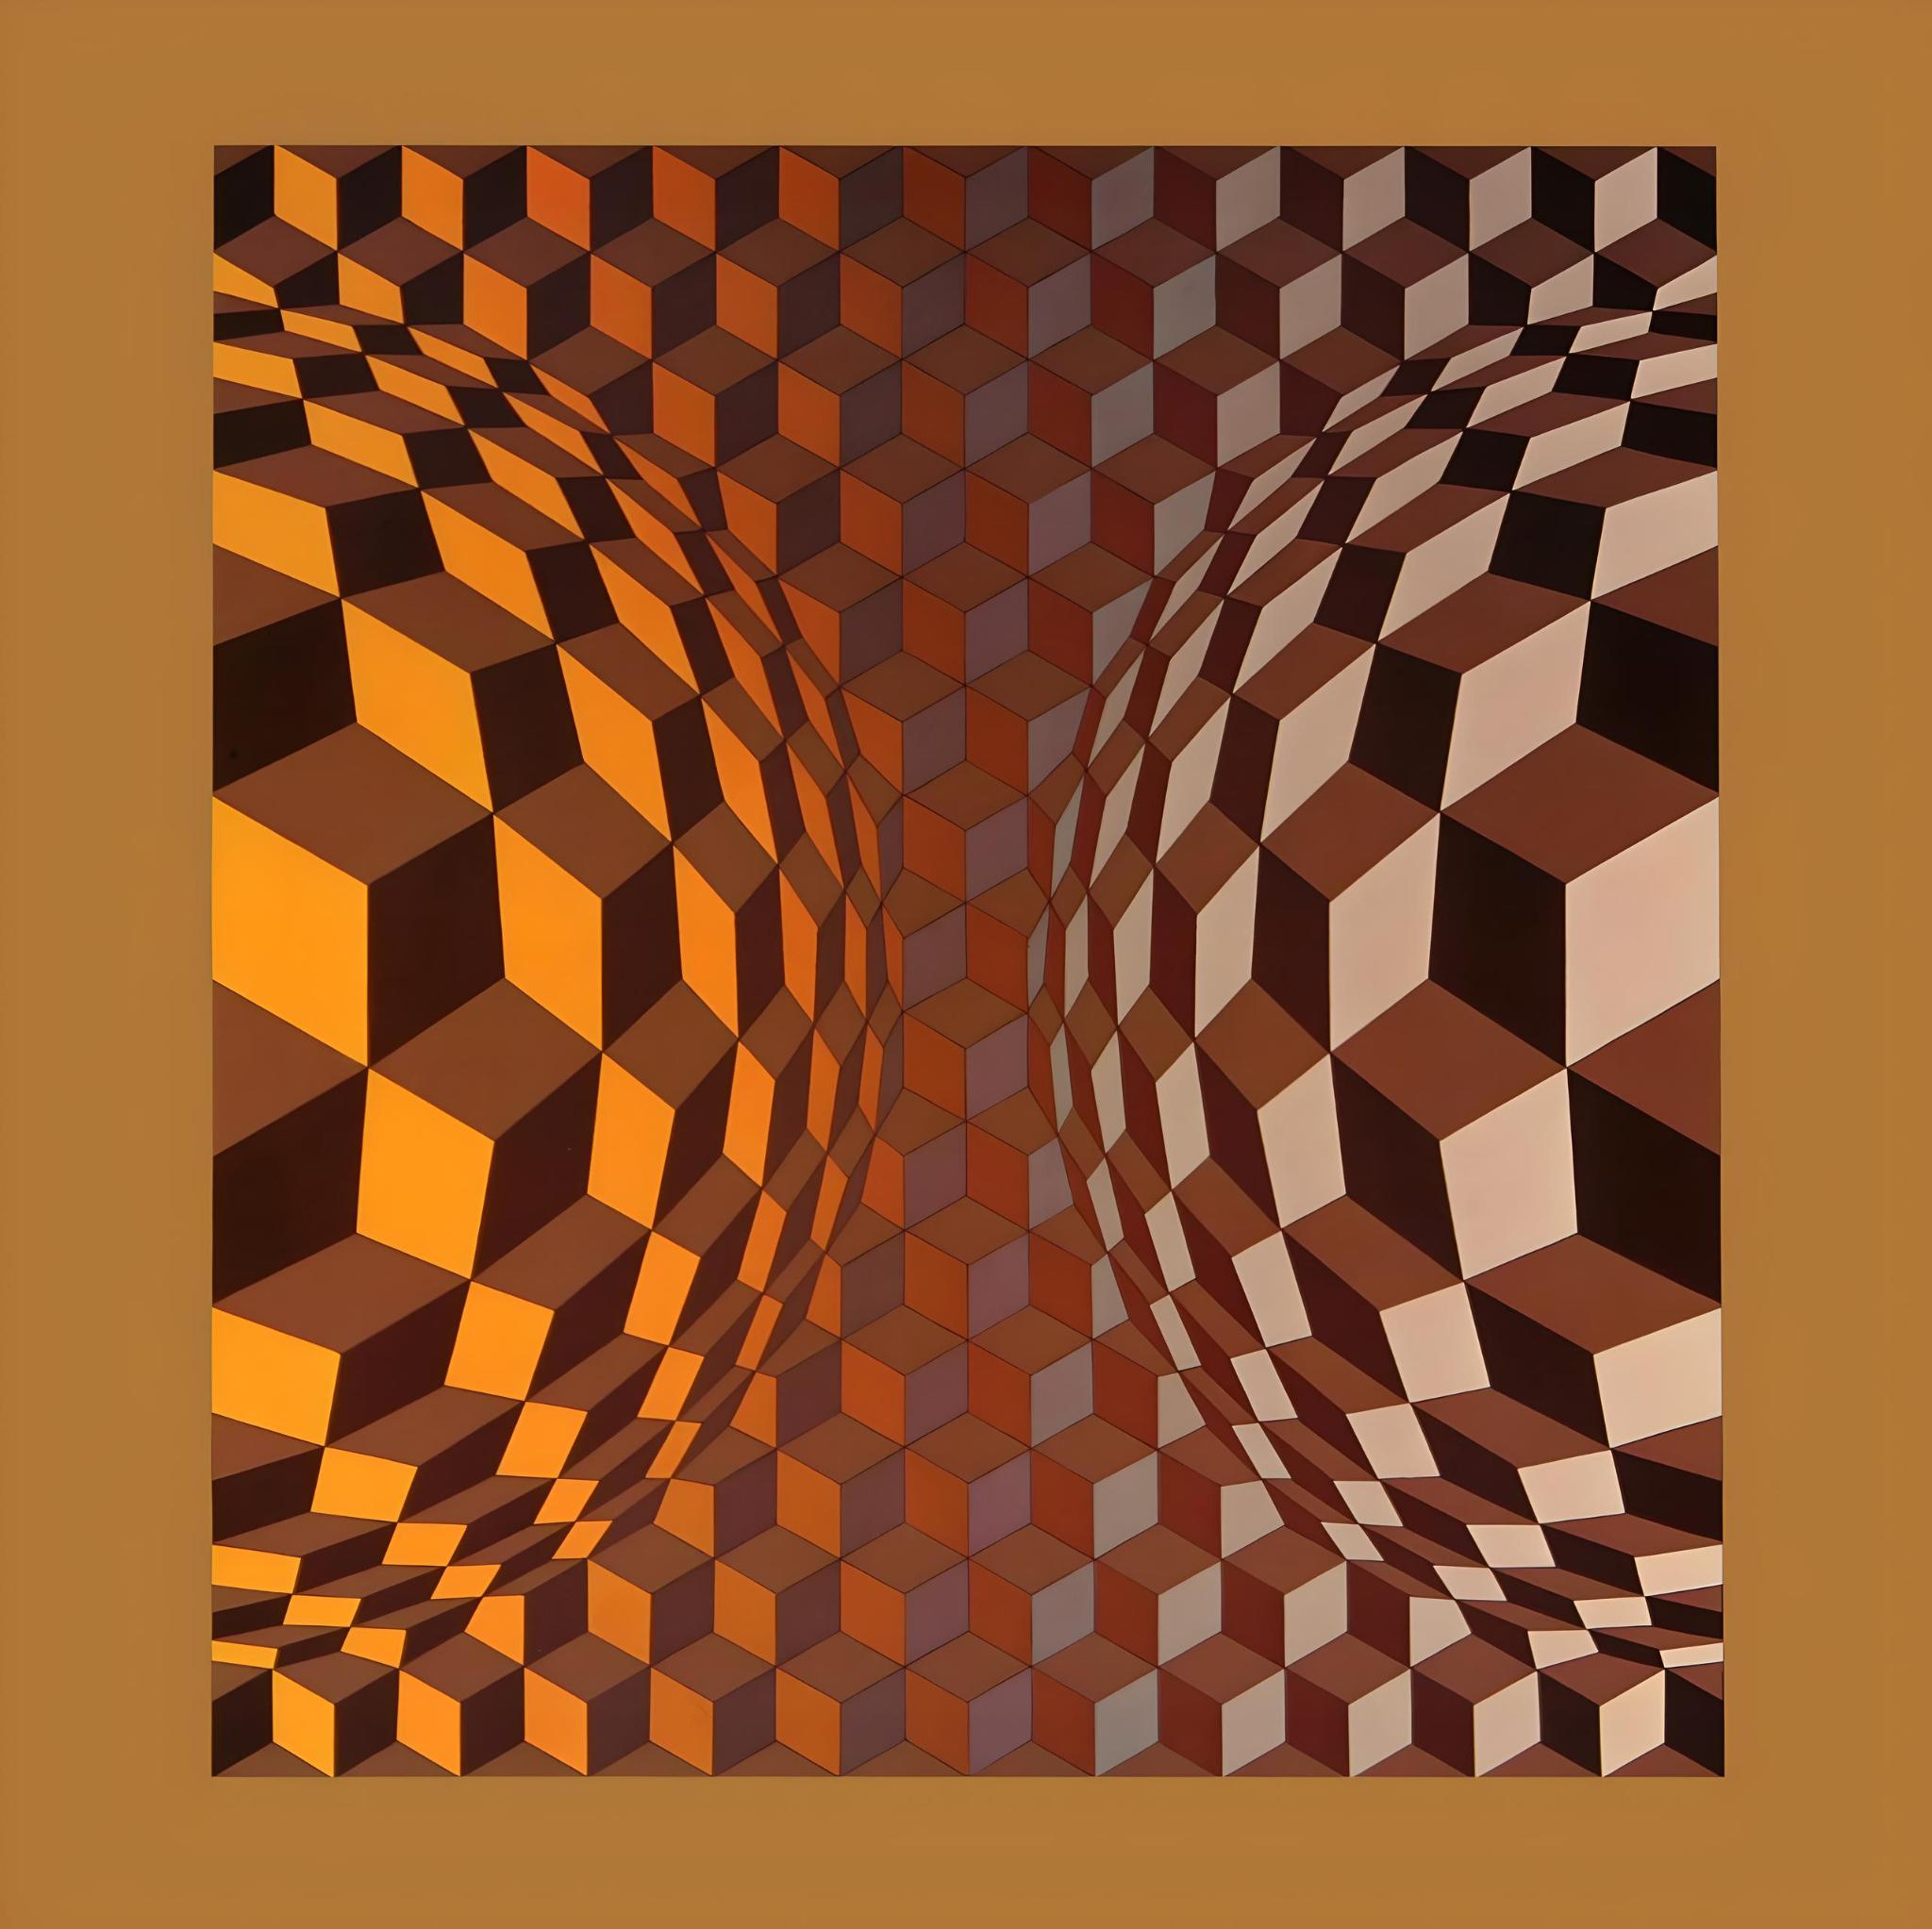 Victor Vasarely Abstract Print - Vasarely, Composition, Structures universelles de l'Hexagone (after)